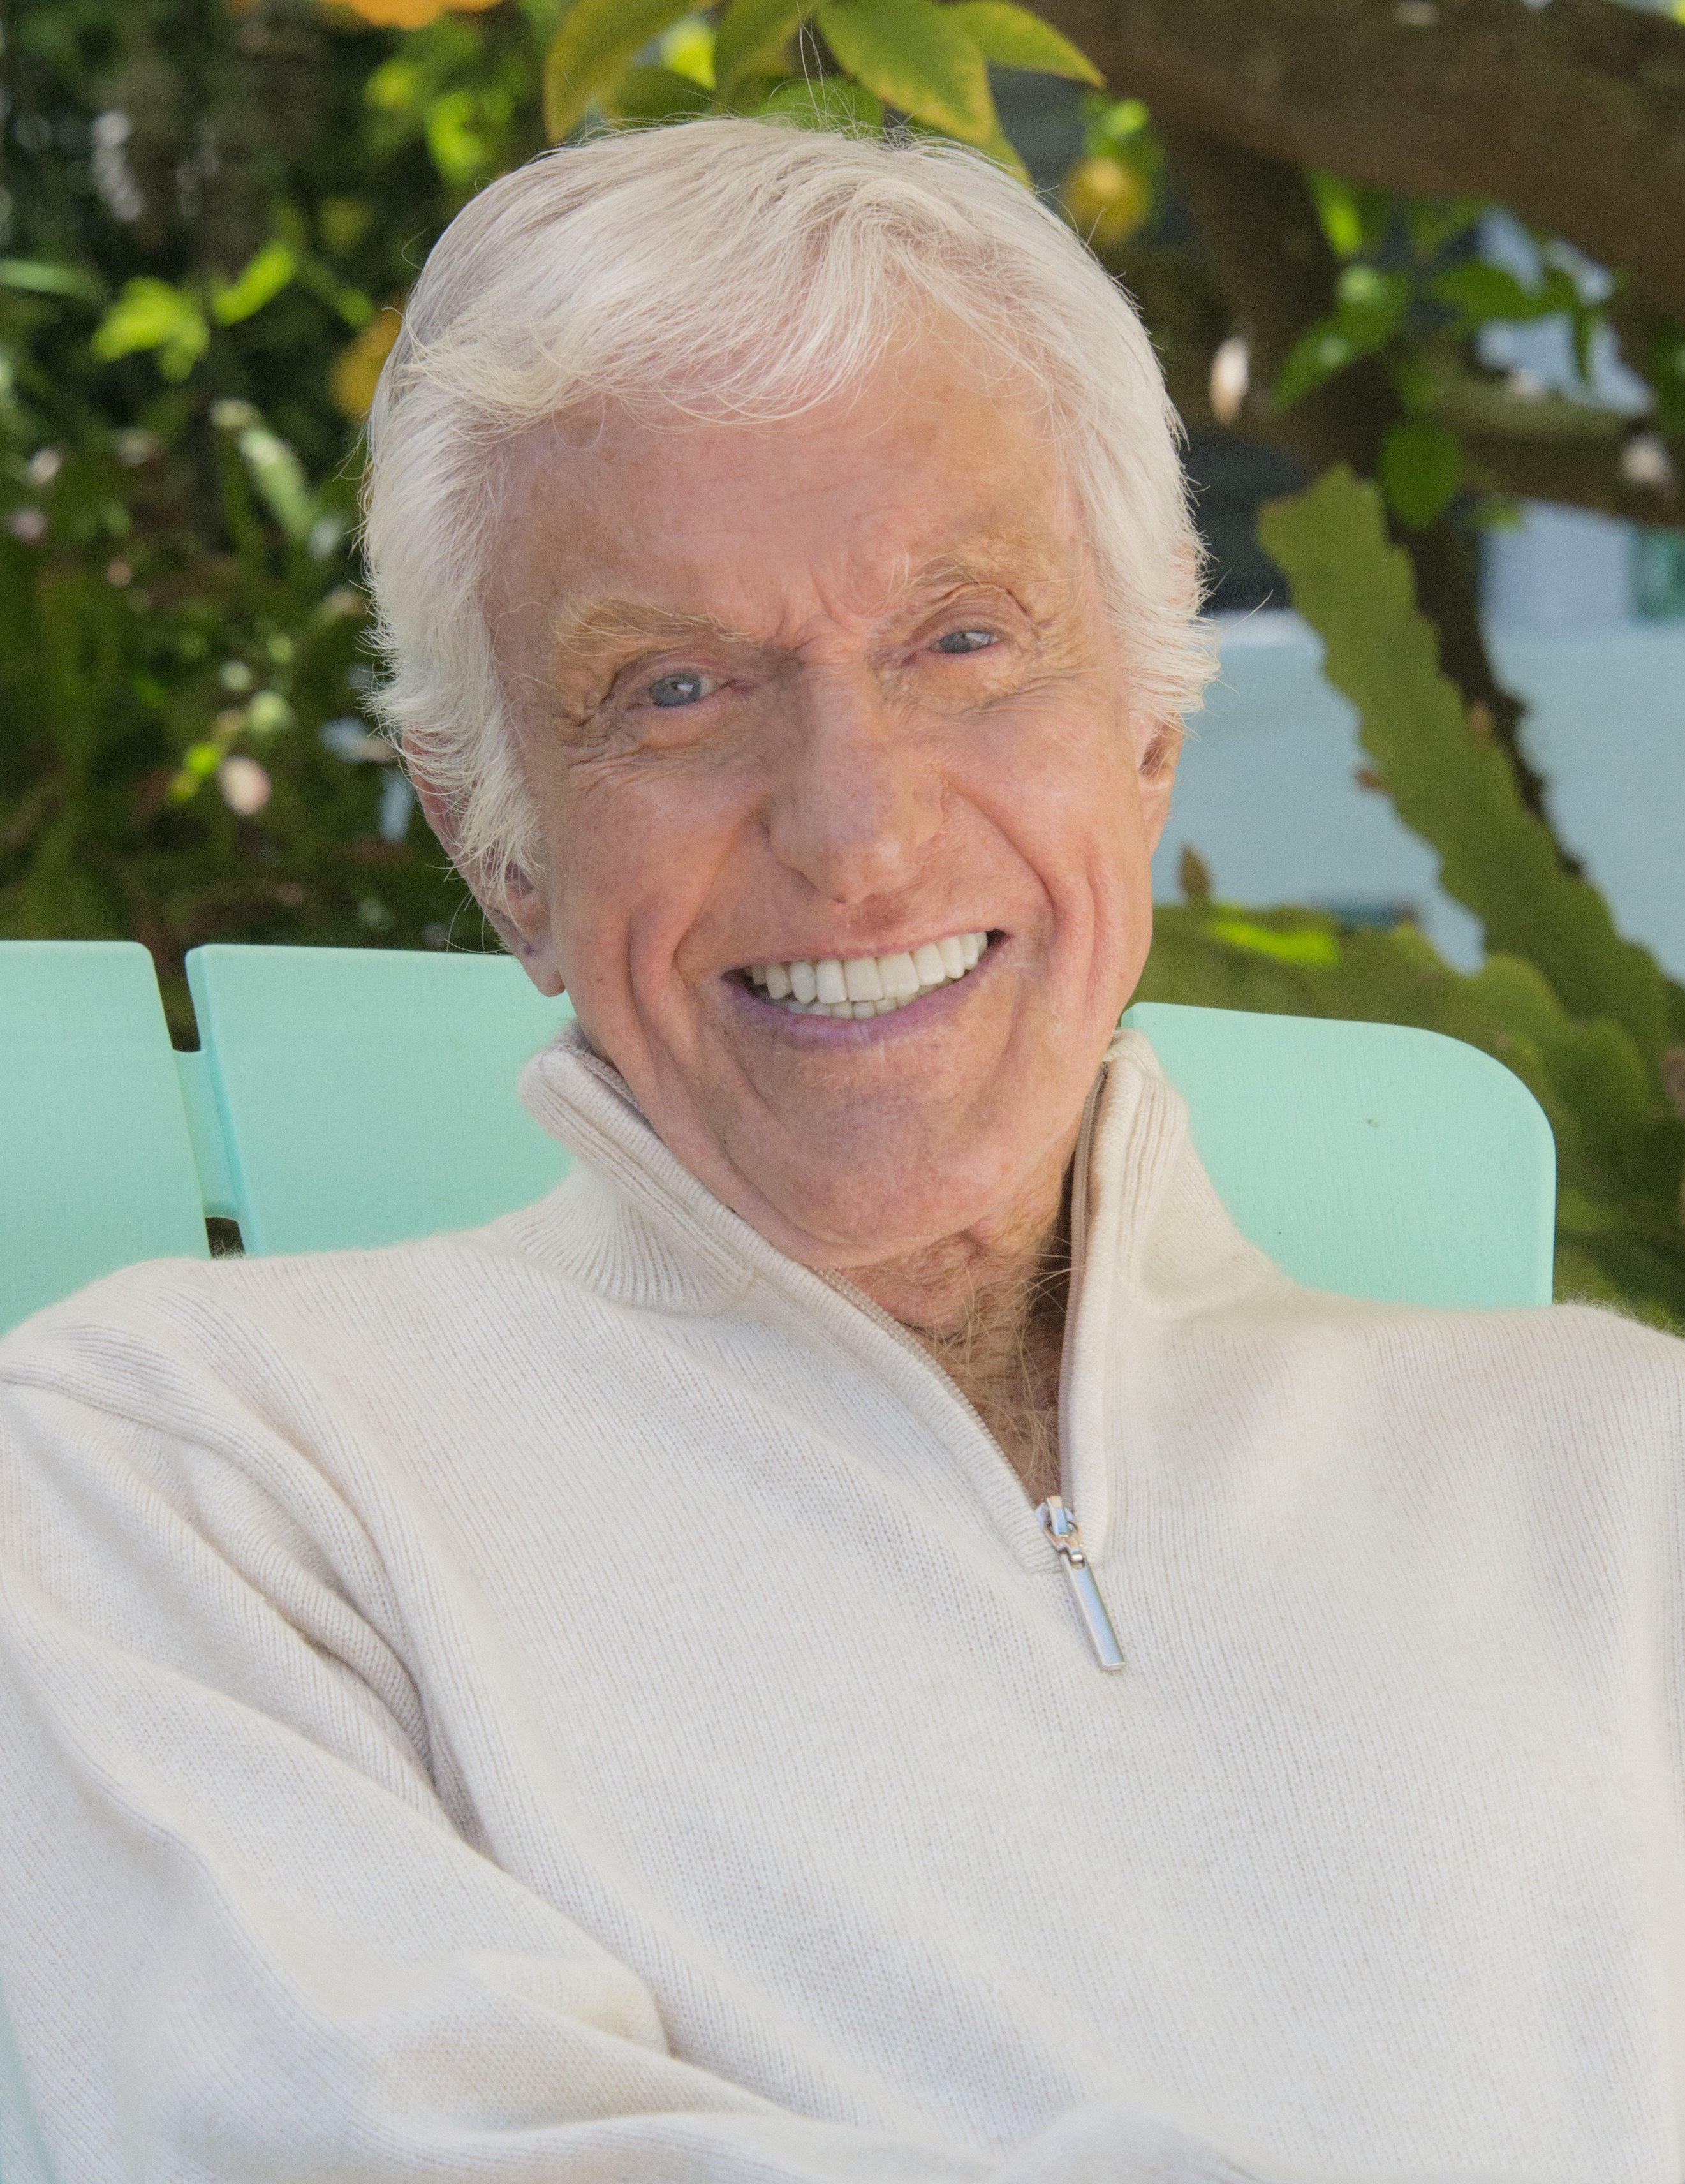 Dick Van Dyke photographed at home during a photo shoot on April 21, 2016 in Malibu, California. | Source: Getty Images